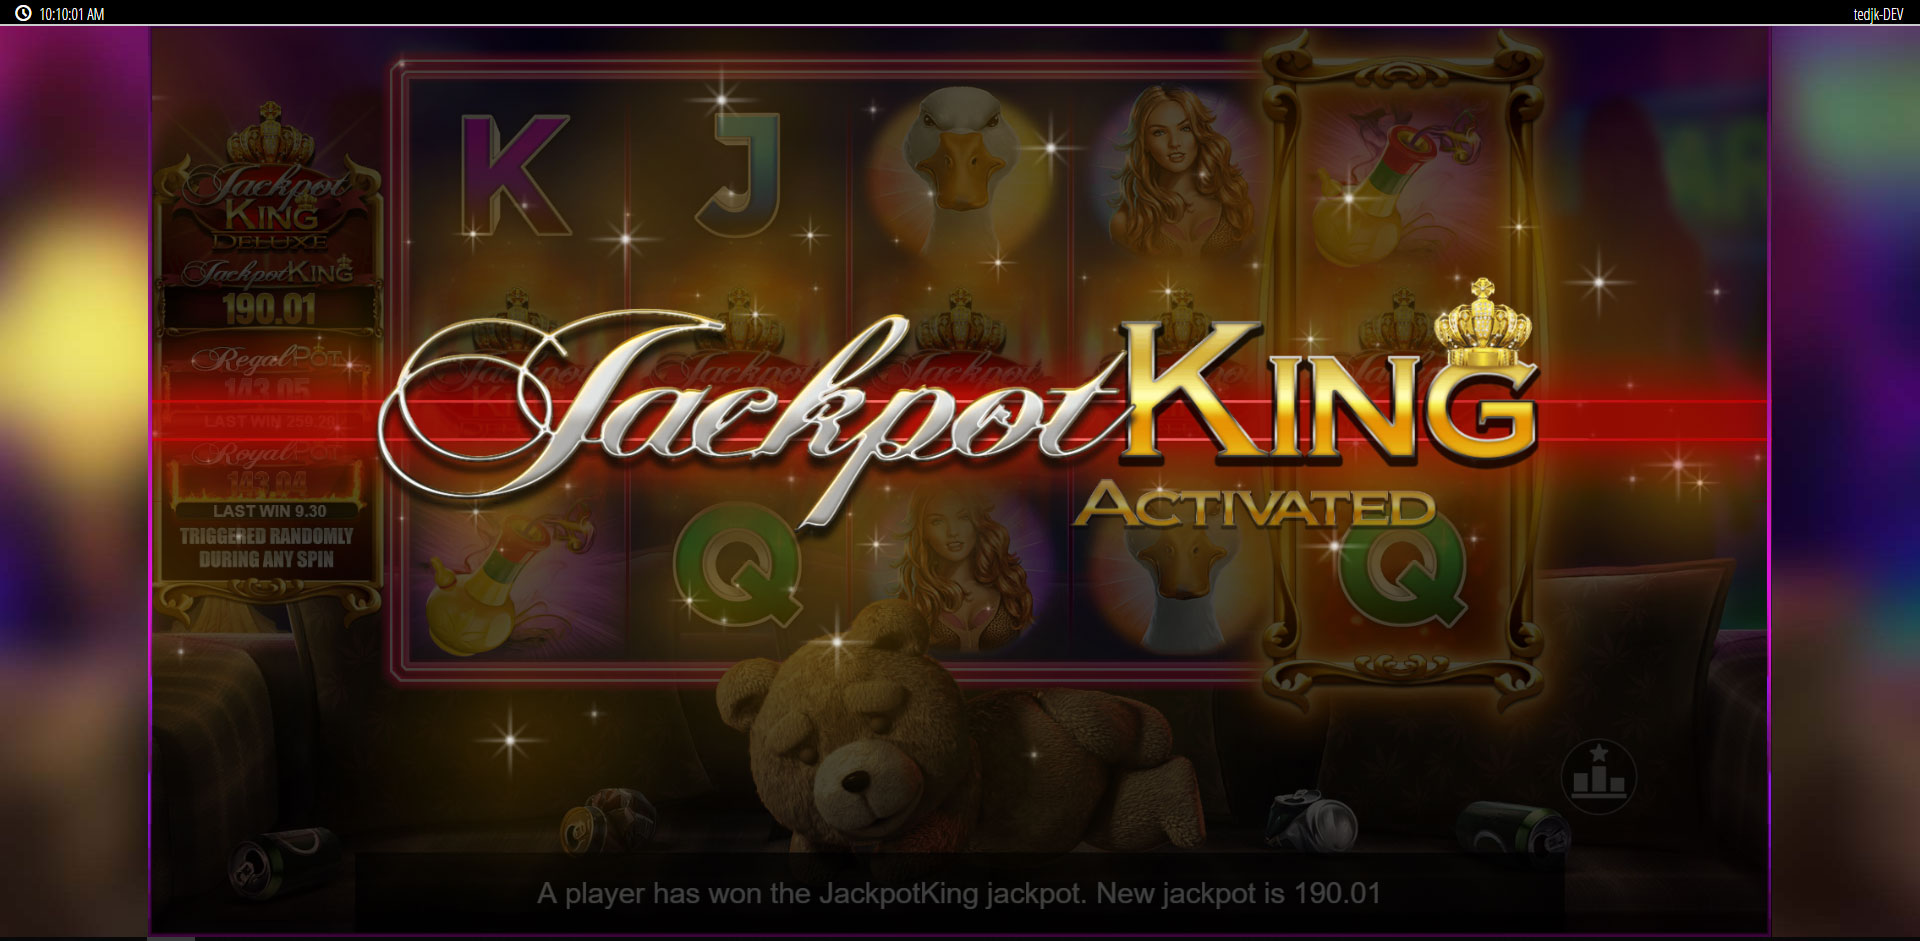 Ted: Jackpot King